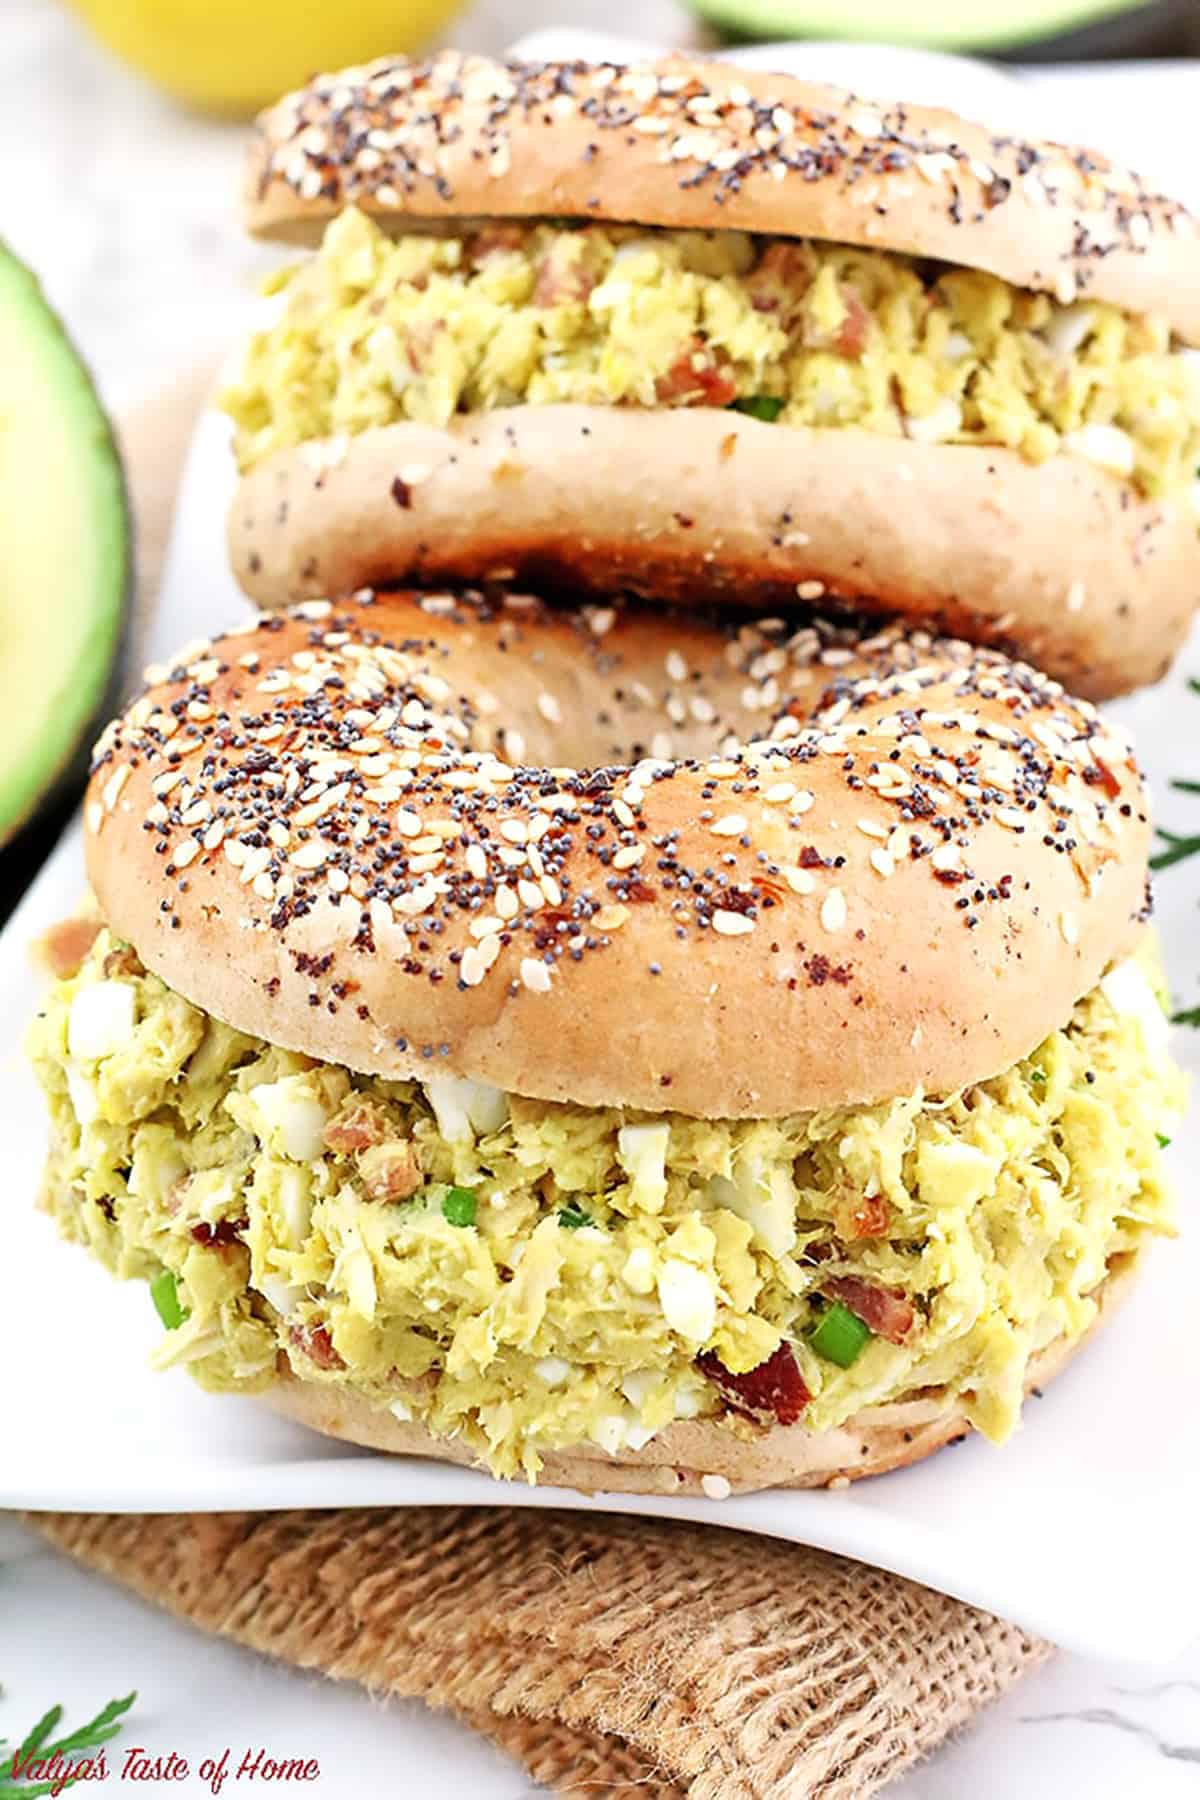 This classic egg salad is mayo-free but still has that perfect creamy texture, thanks to some avocados!